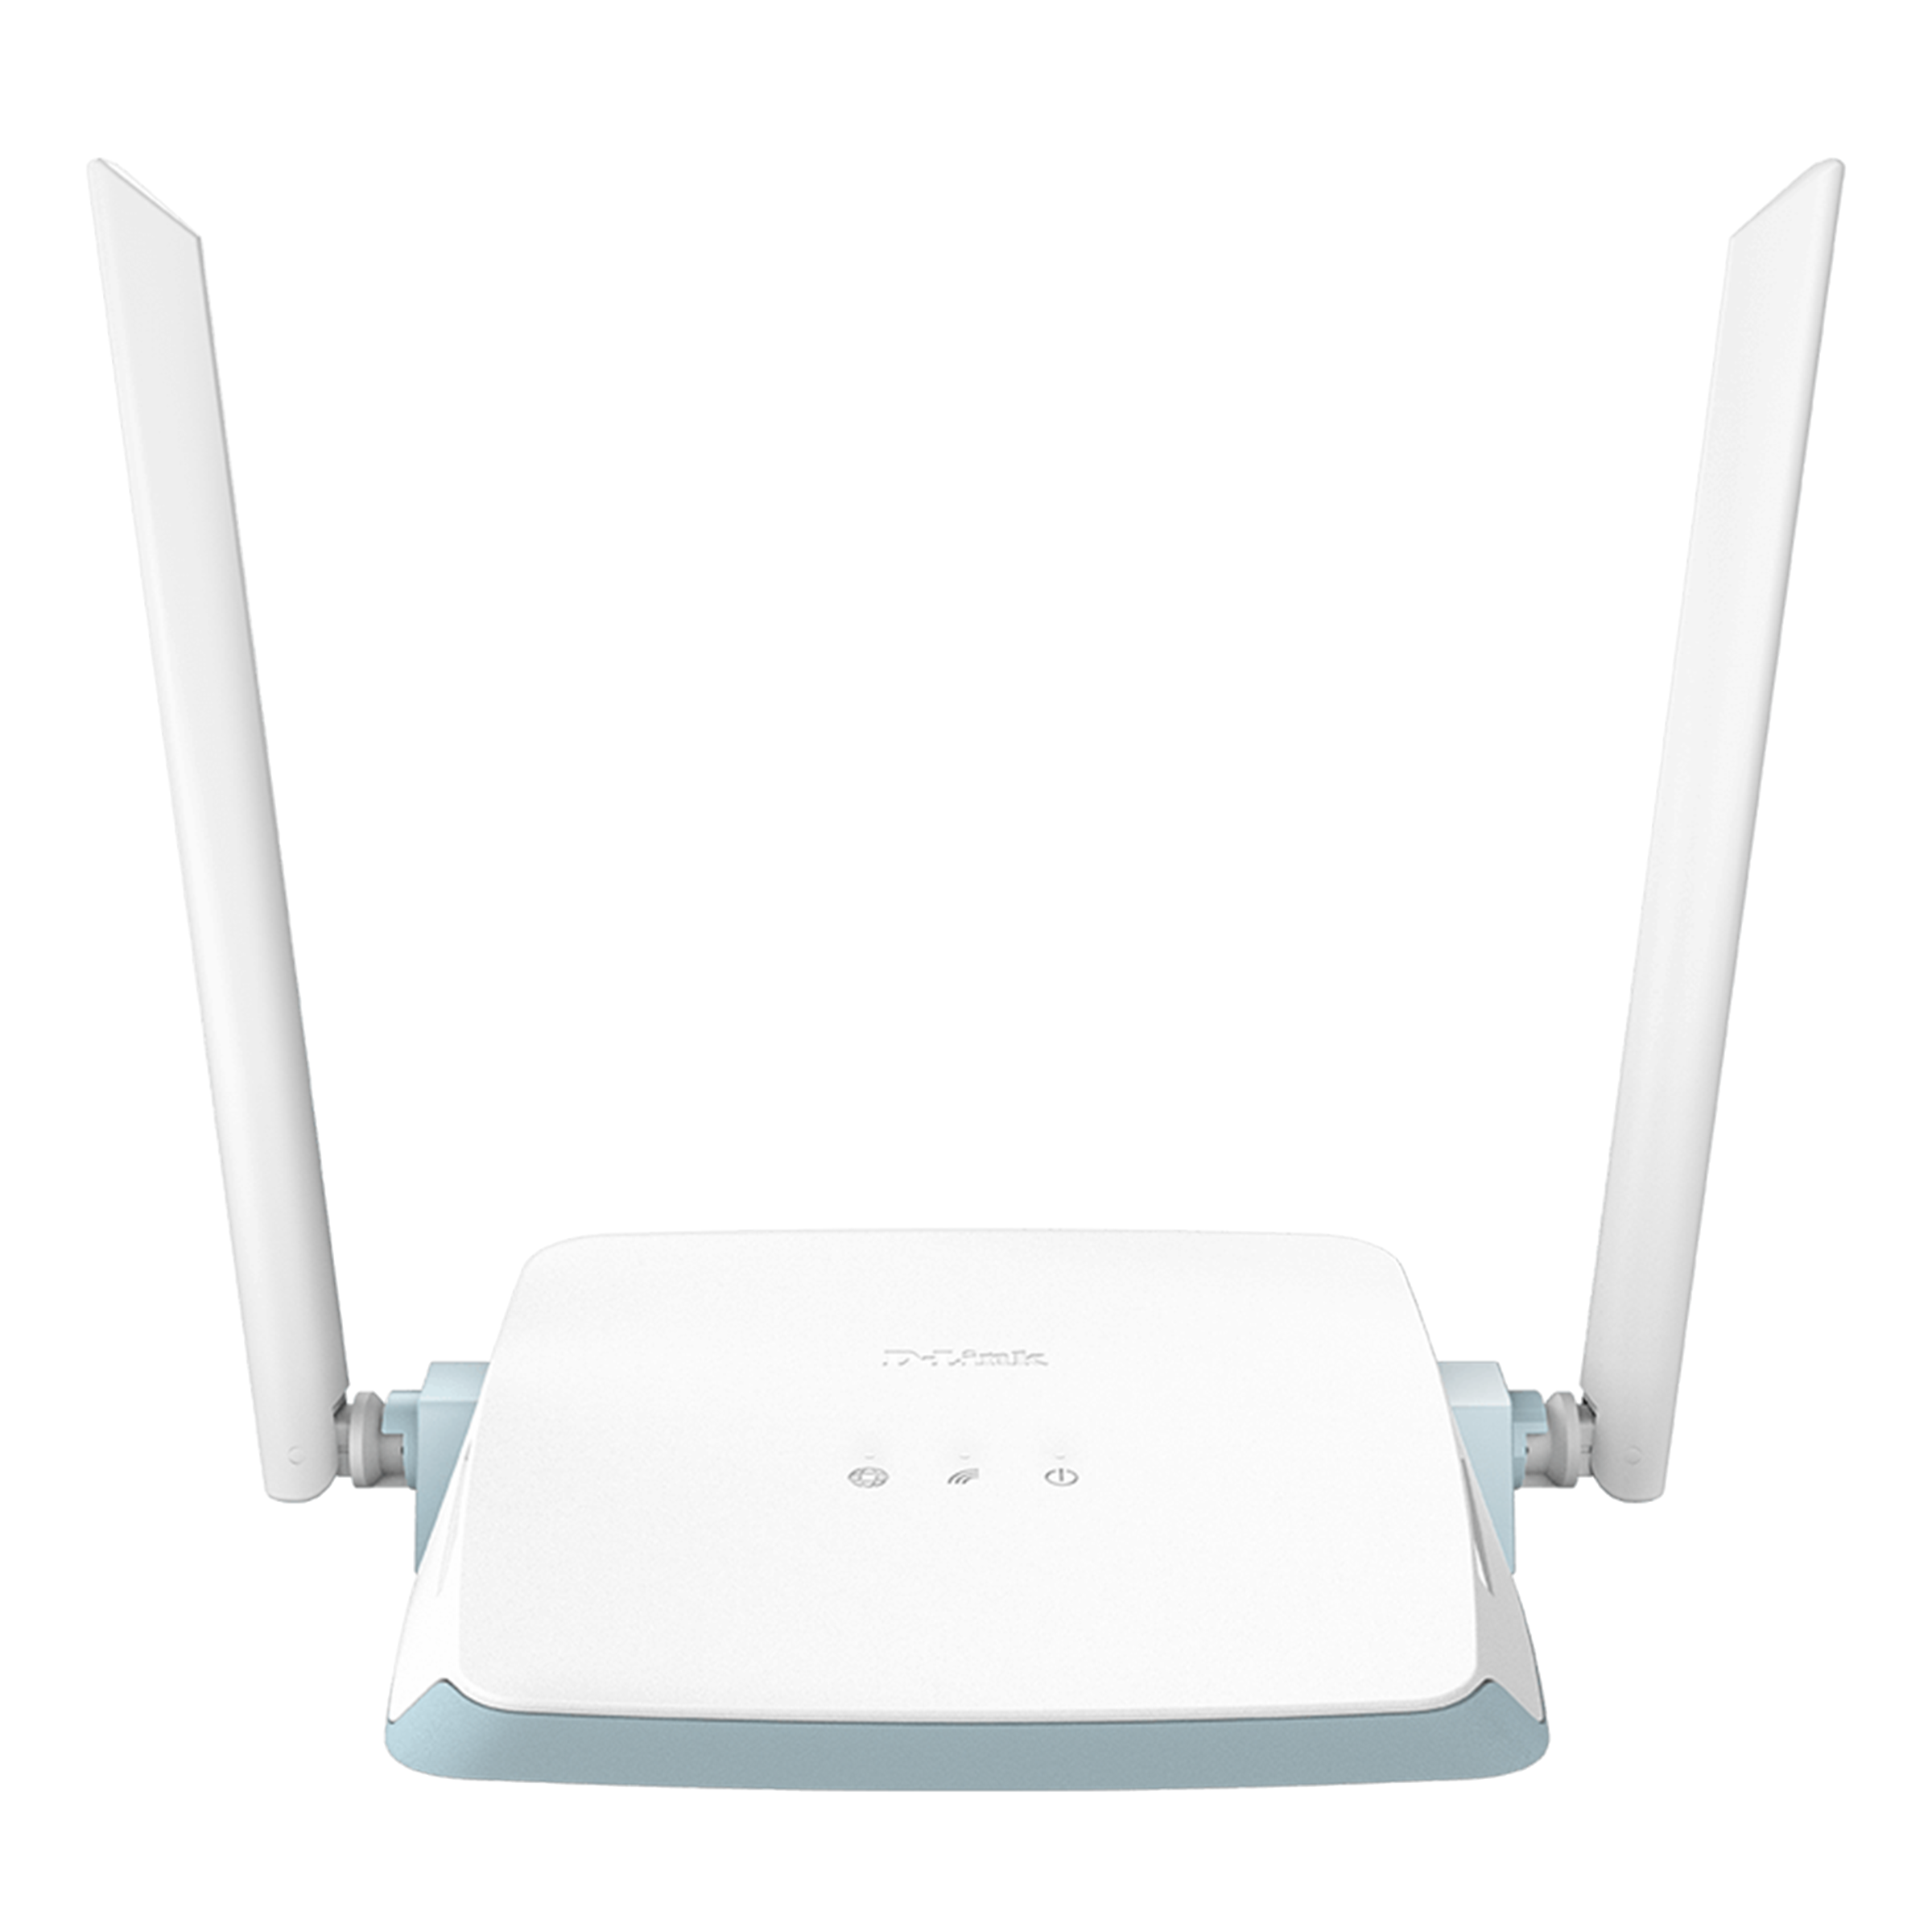 D-Link N300 Single Band 300 Mbps Wi-Fi Smart Router (2 Antennas, 4 LAN Ports, Voice Assistant Supported, R03, White)_1